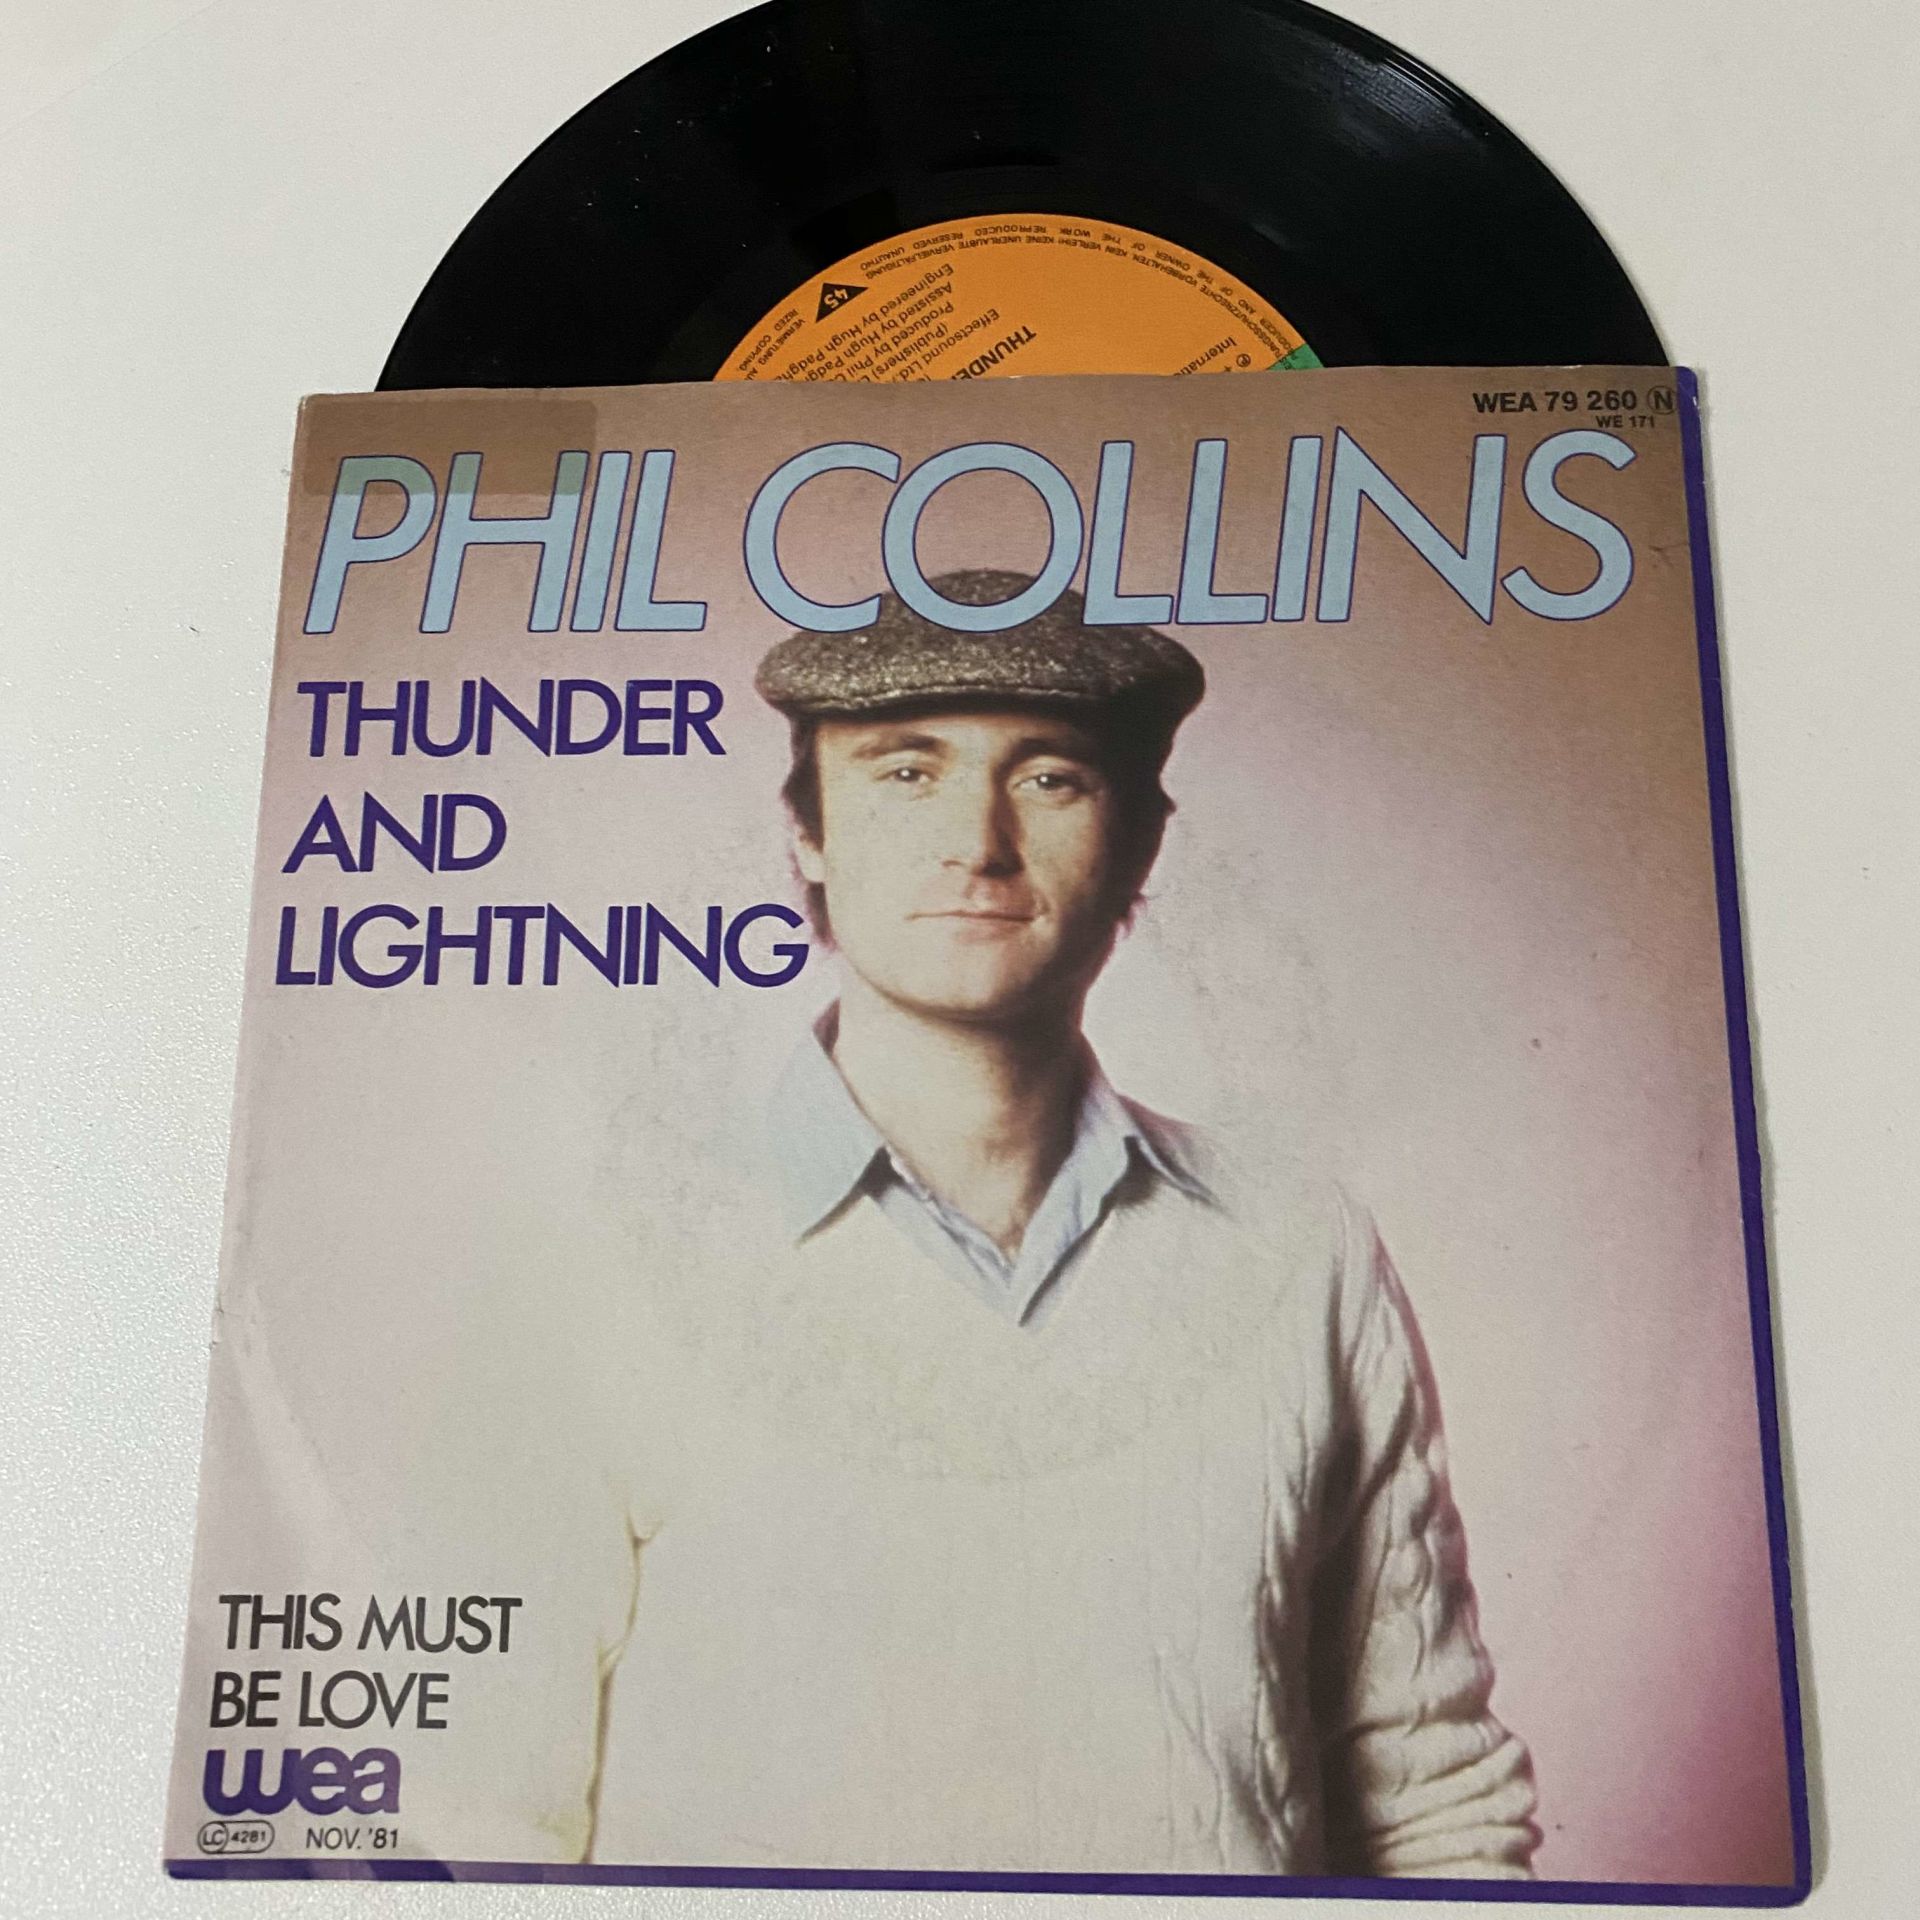 Phil Collins – Thunder And Lightning